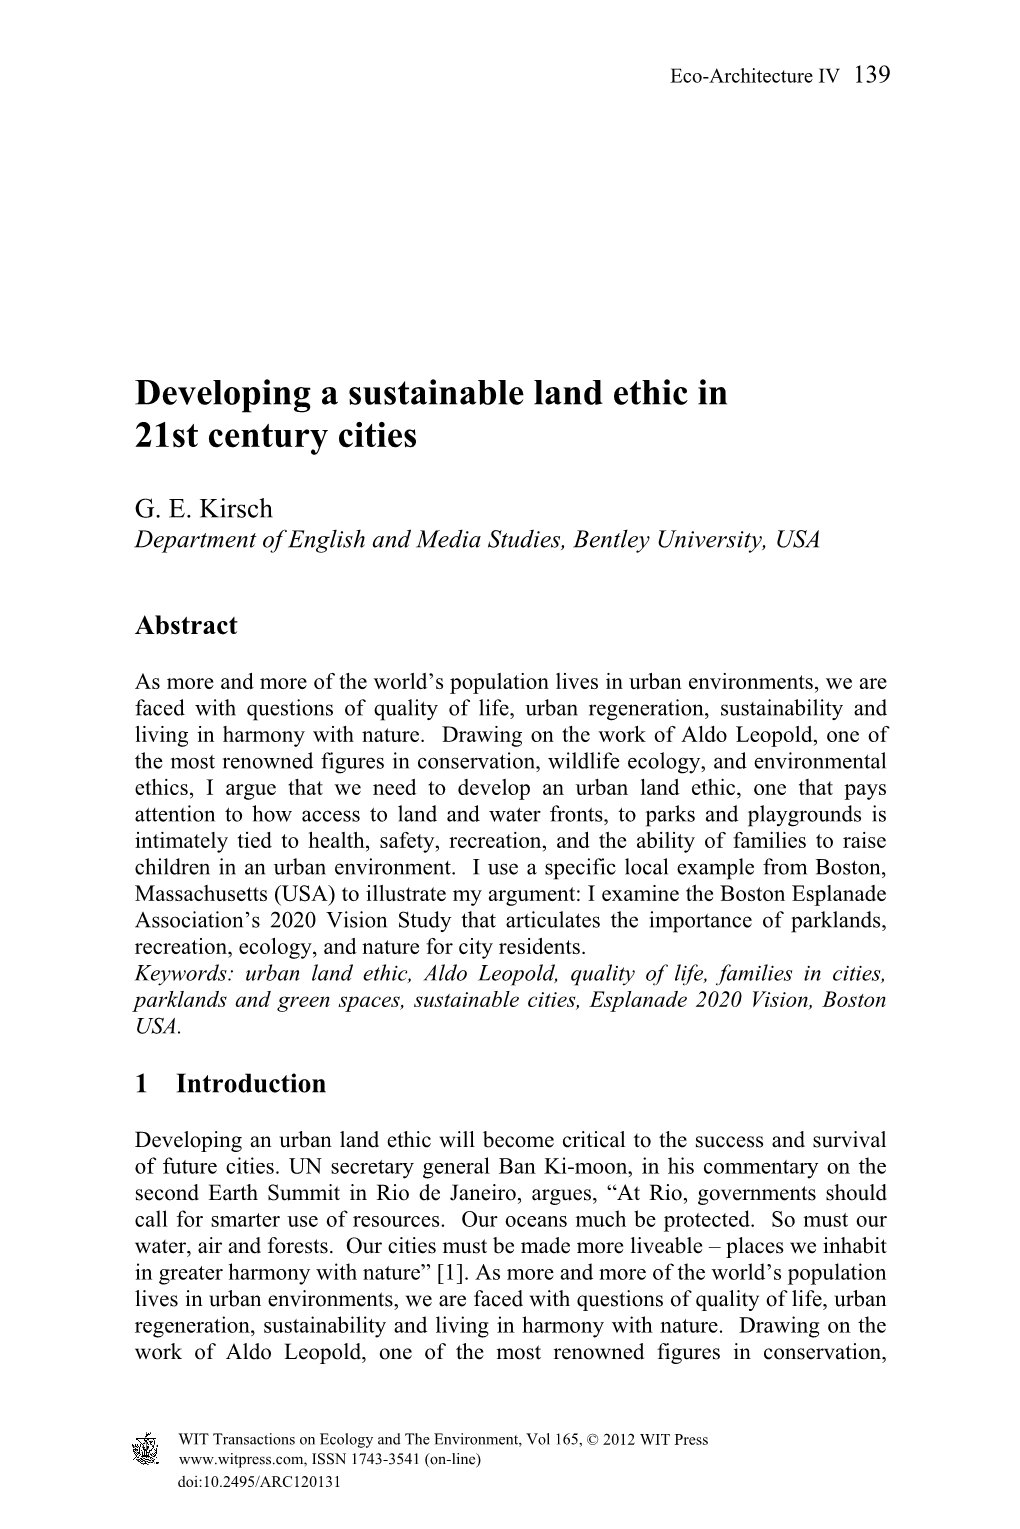 Developing a Sustainable Land Ethic in 21St Century Cities